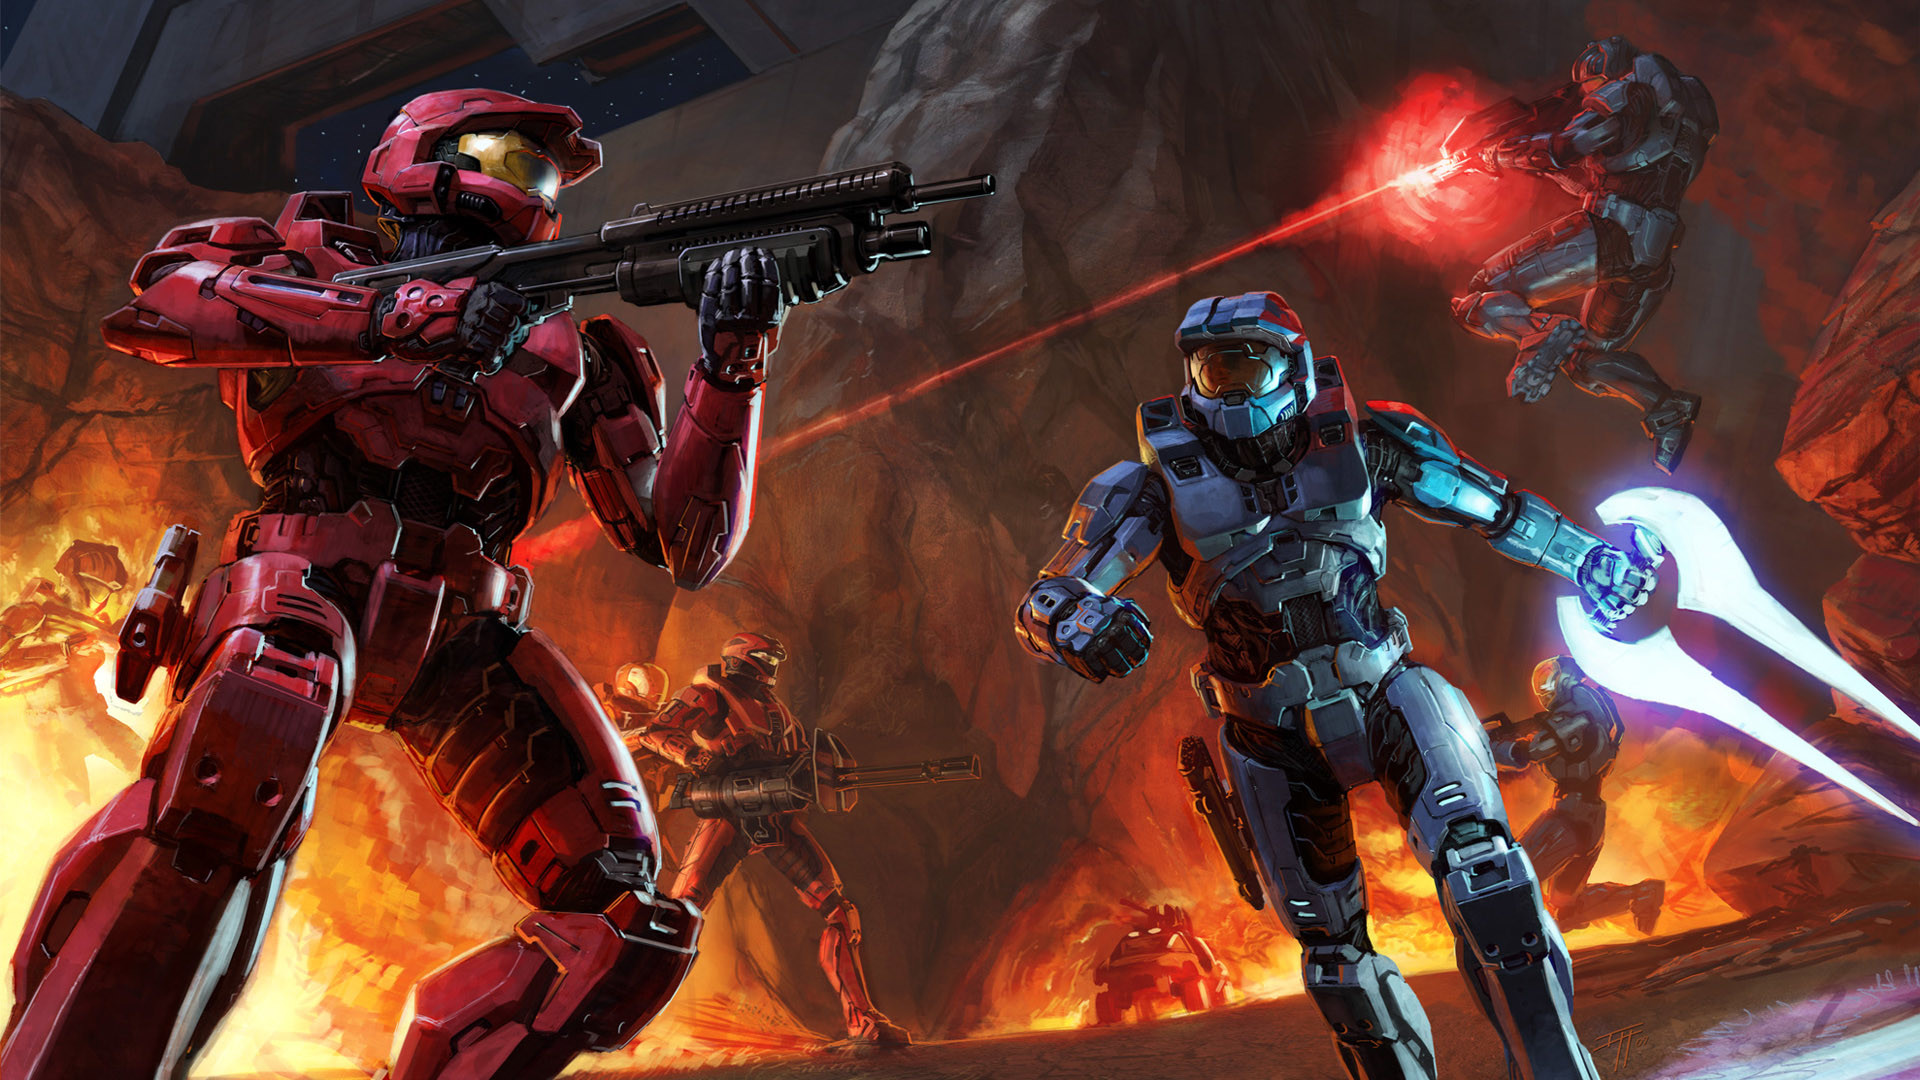 1920x1080 Halo - Speaking of awesome Halo 3 art, this piece was done for a cover  story in Gamepro magazine.